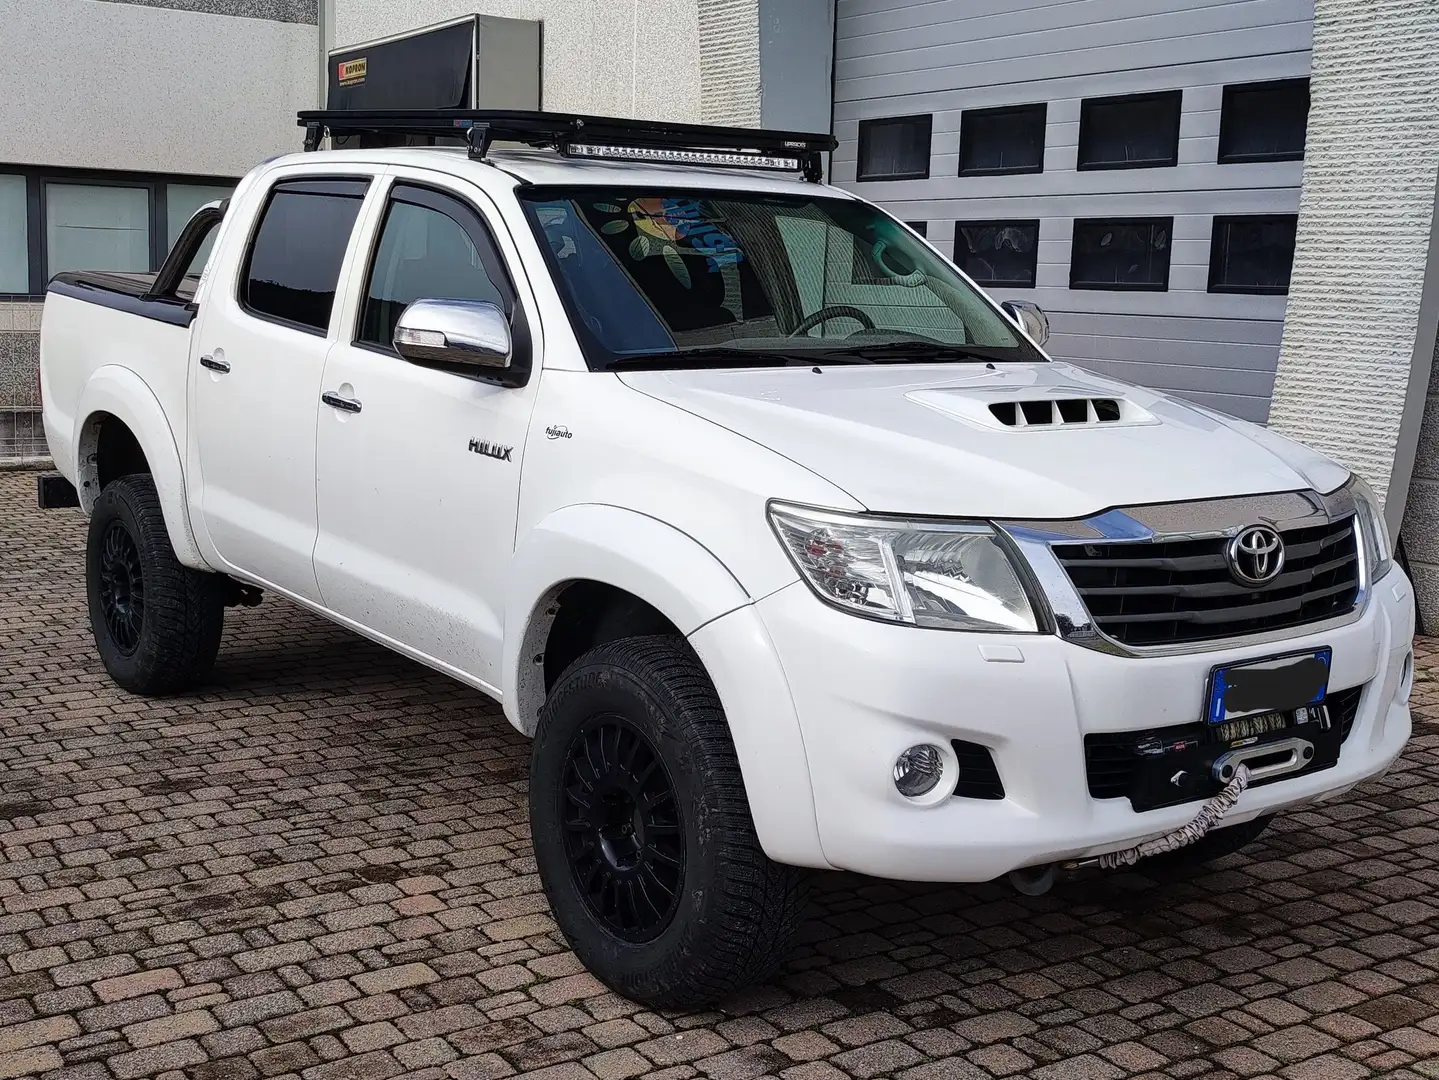 Toyota Hilux Hilux 3.0 double cab Stylex Wit - 1